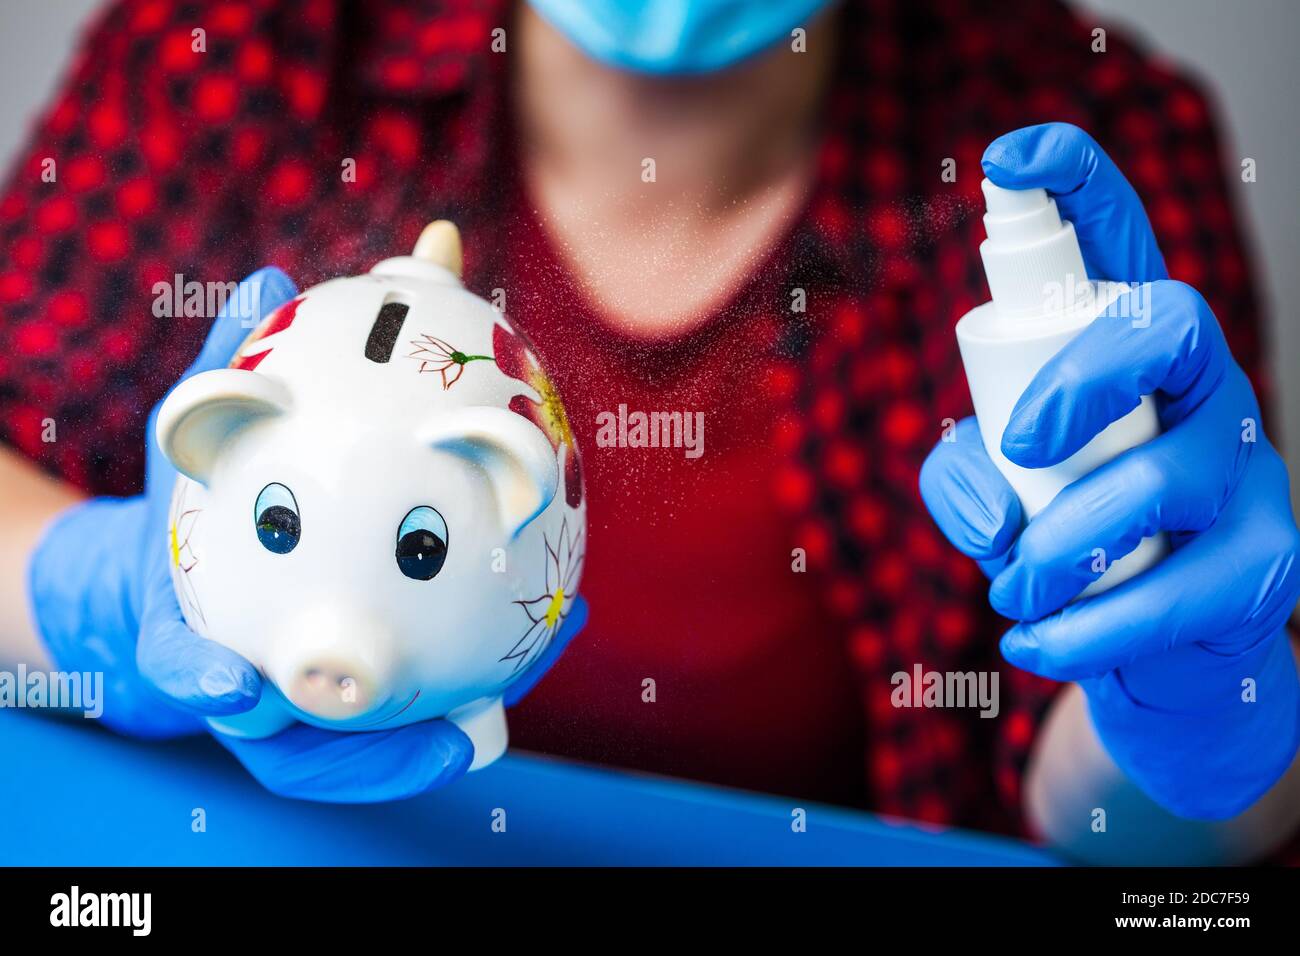 Coronavirus COVID-19 corona virus disease global pandemic outbreak,person holding piggy bank wearing blue surgical protective gloves,disinfecting Stock Photo